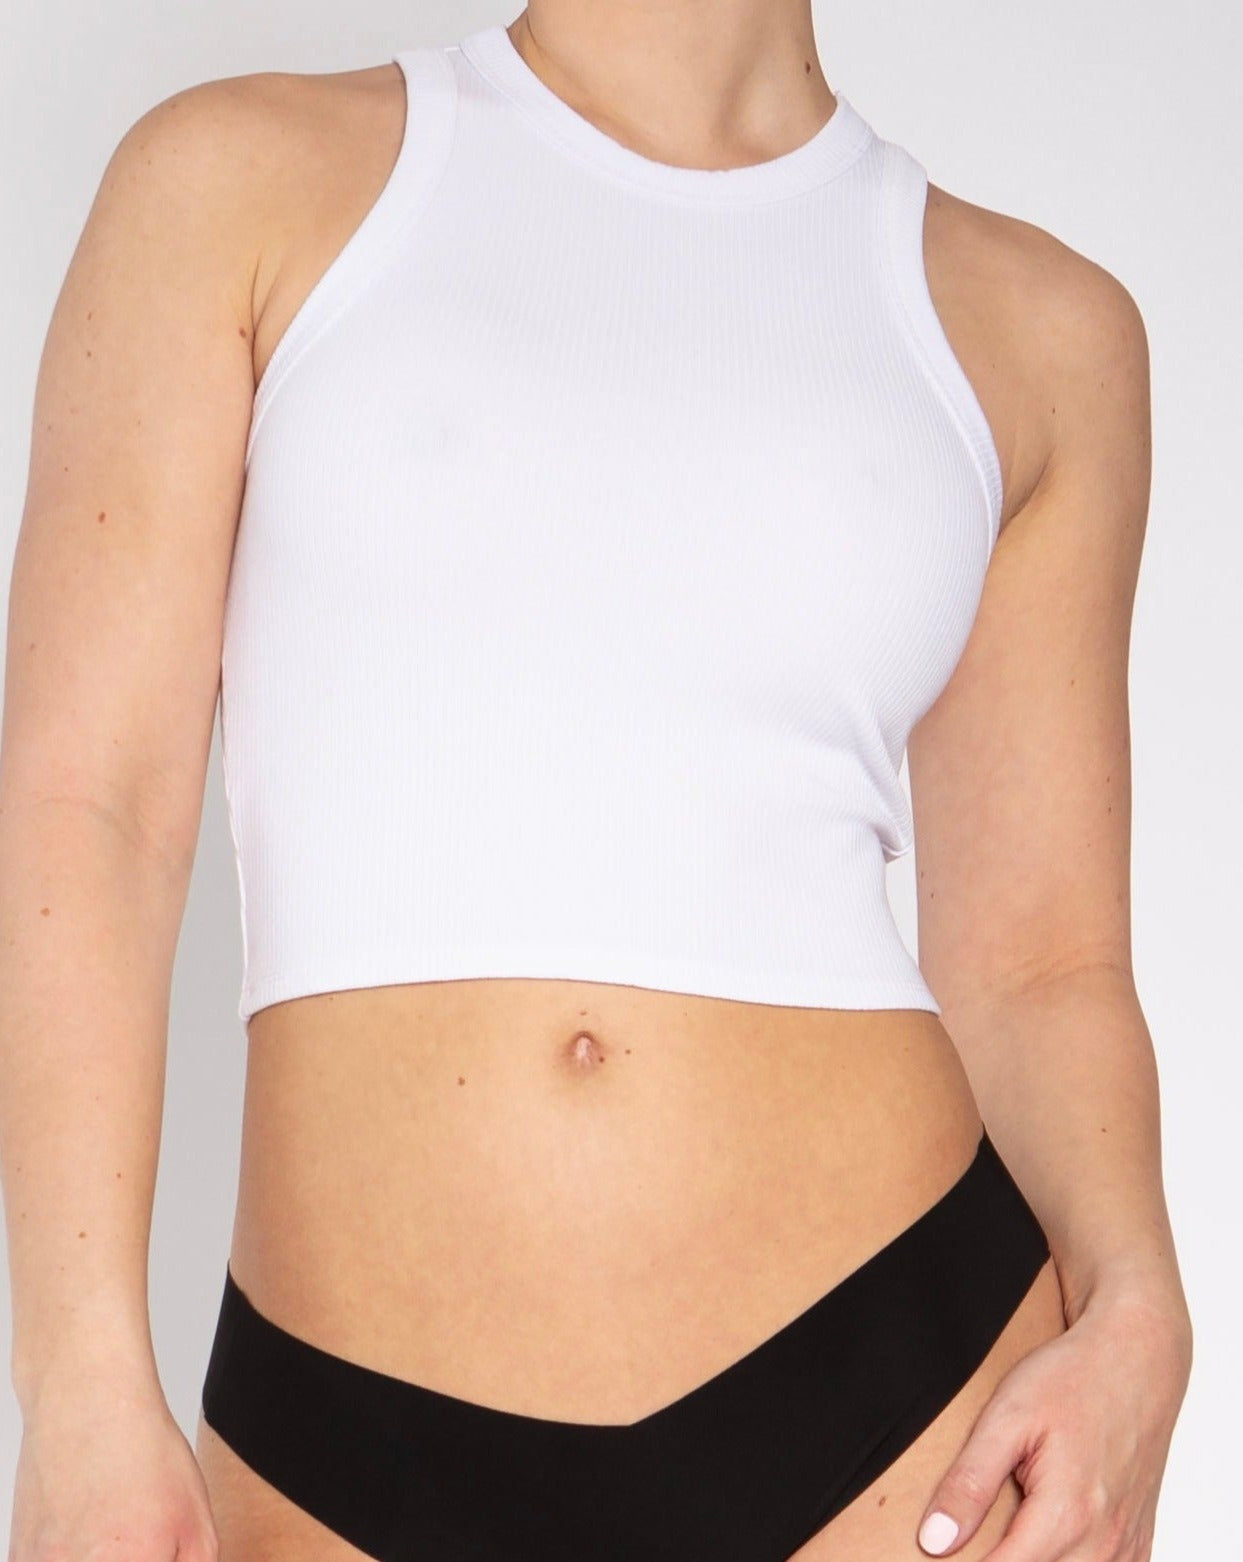 V FOR CITY Ribbed Cami Crop Tops with Shelf Bra for Nepal